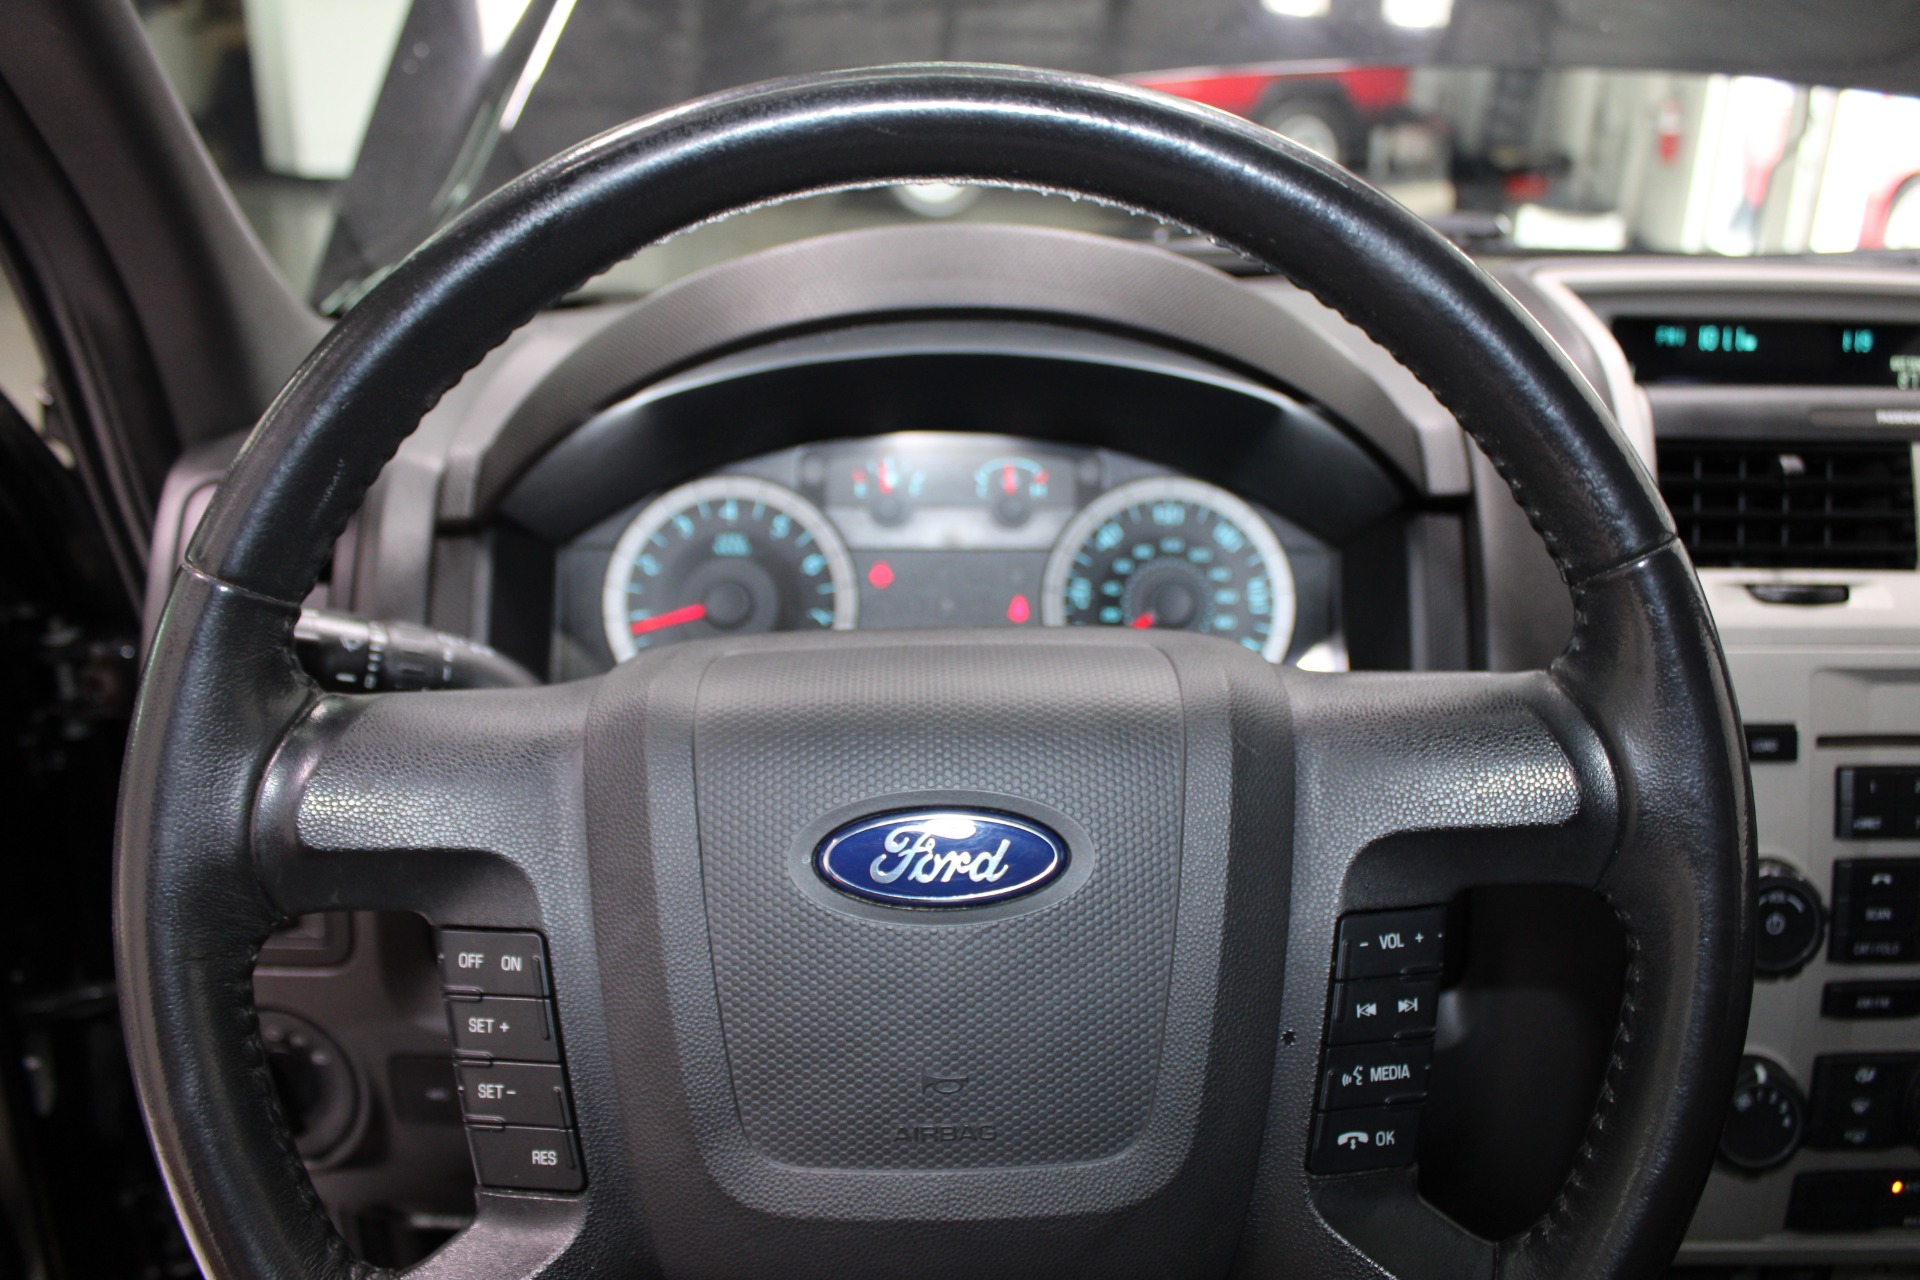 Used-2011-Ford-Escape-XLT-Honda